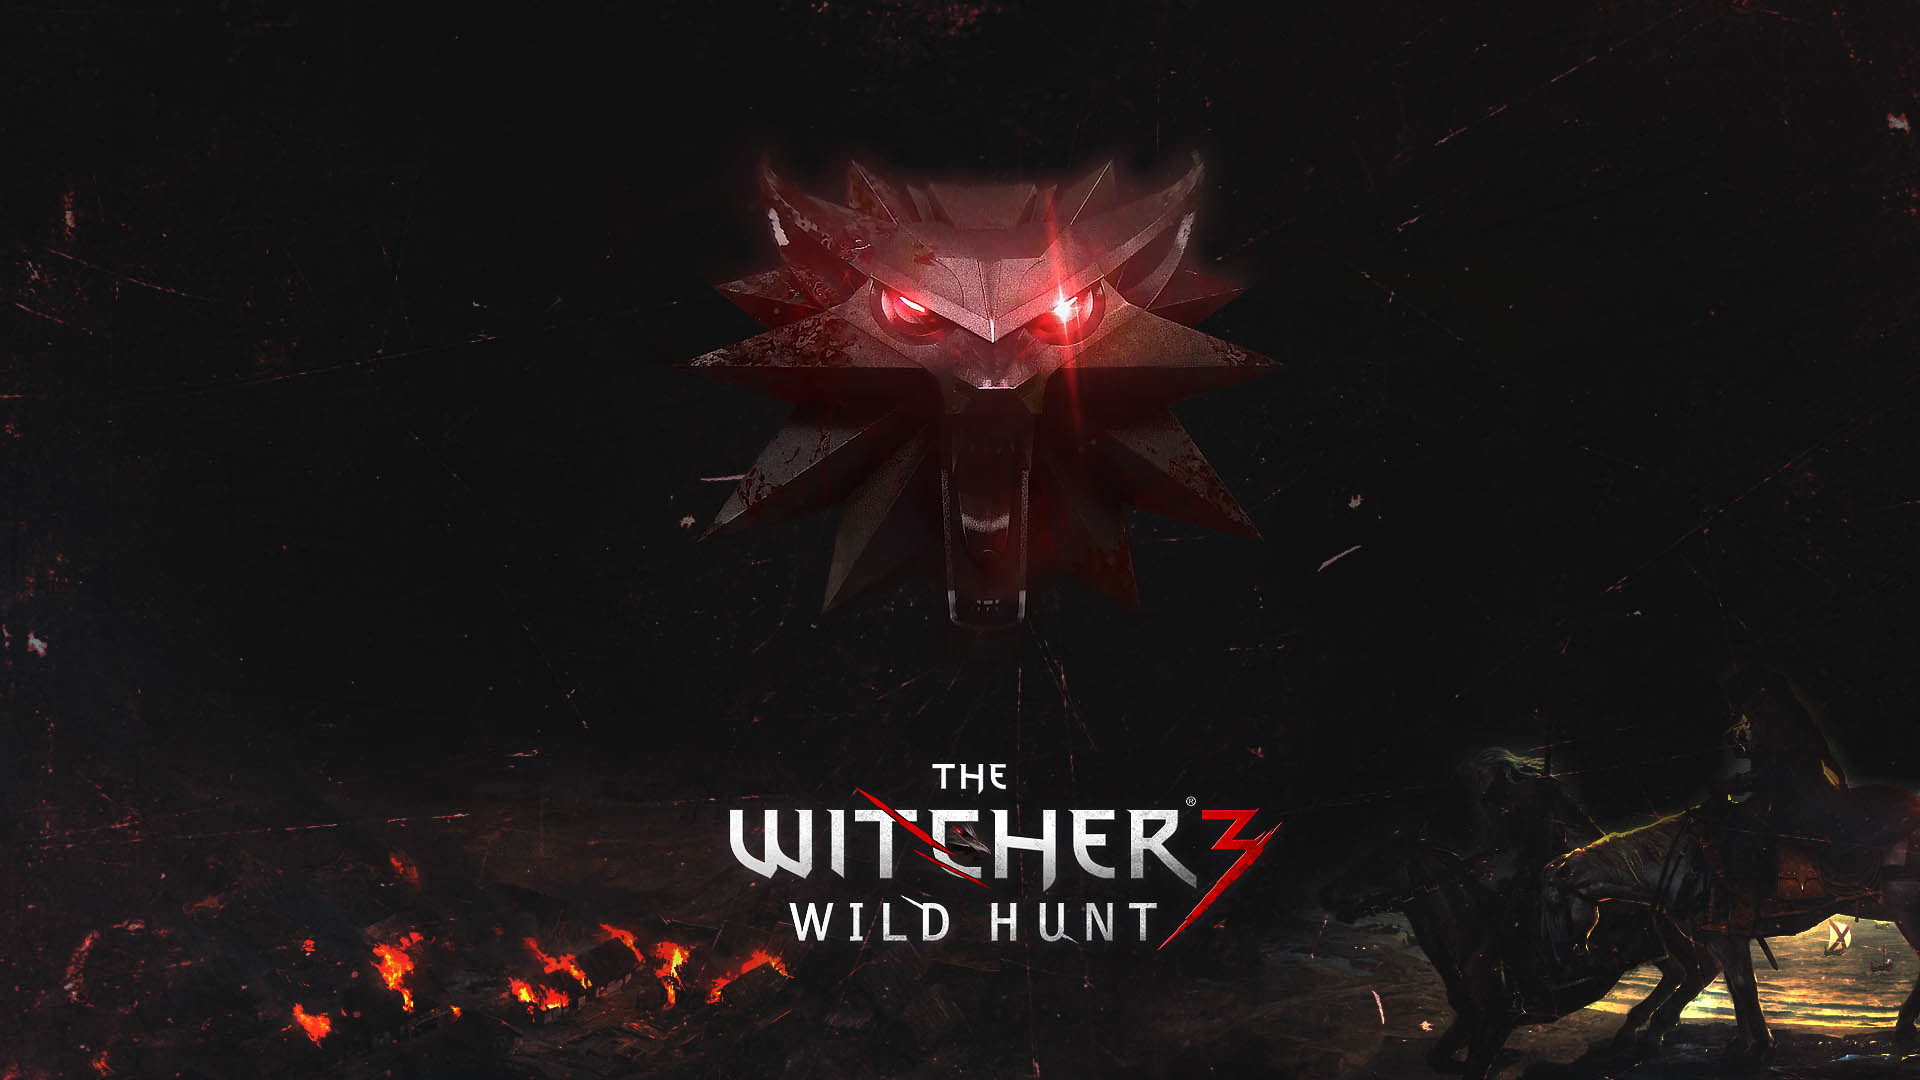 The Witcher 3 Medallion wallpaper